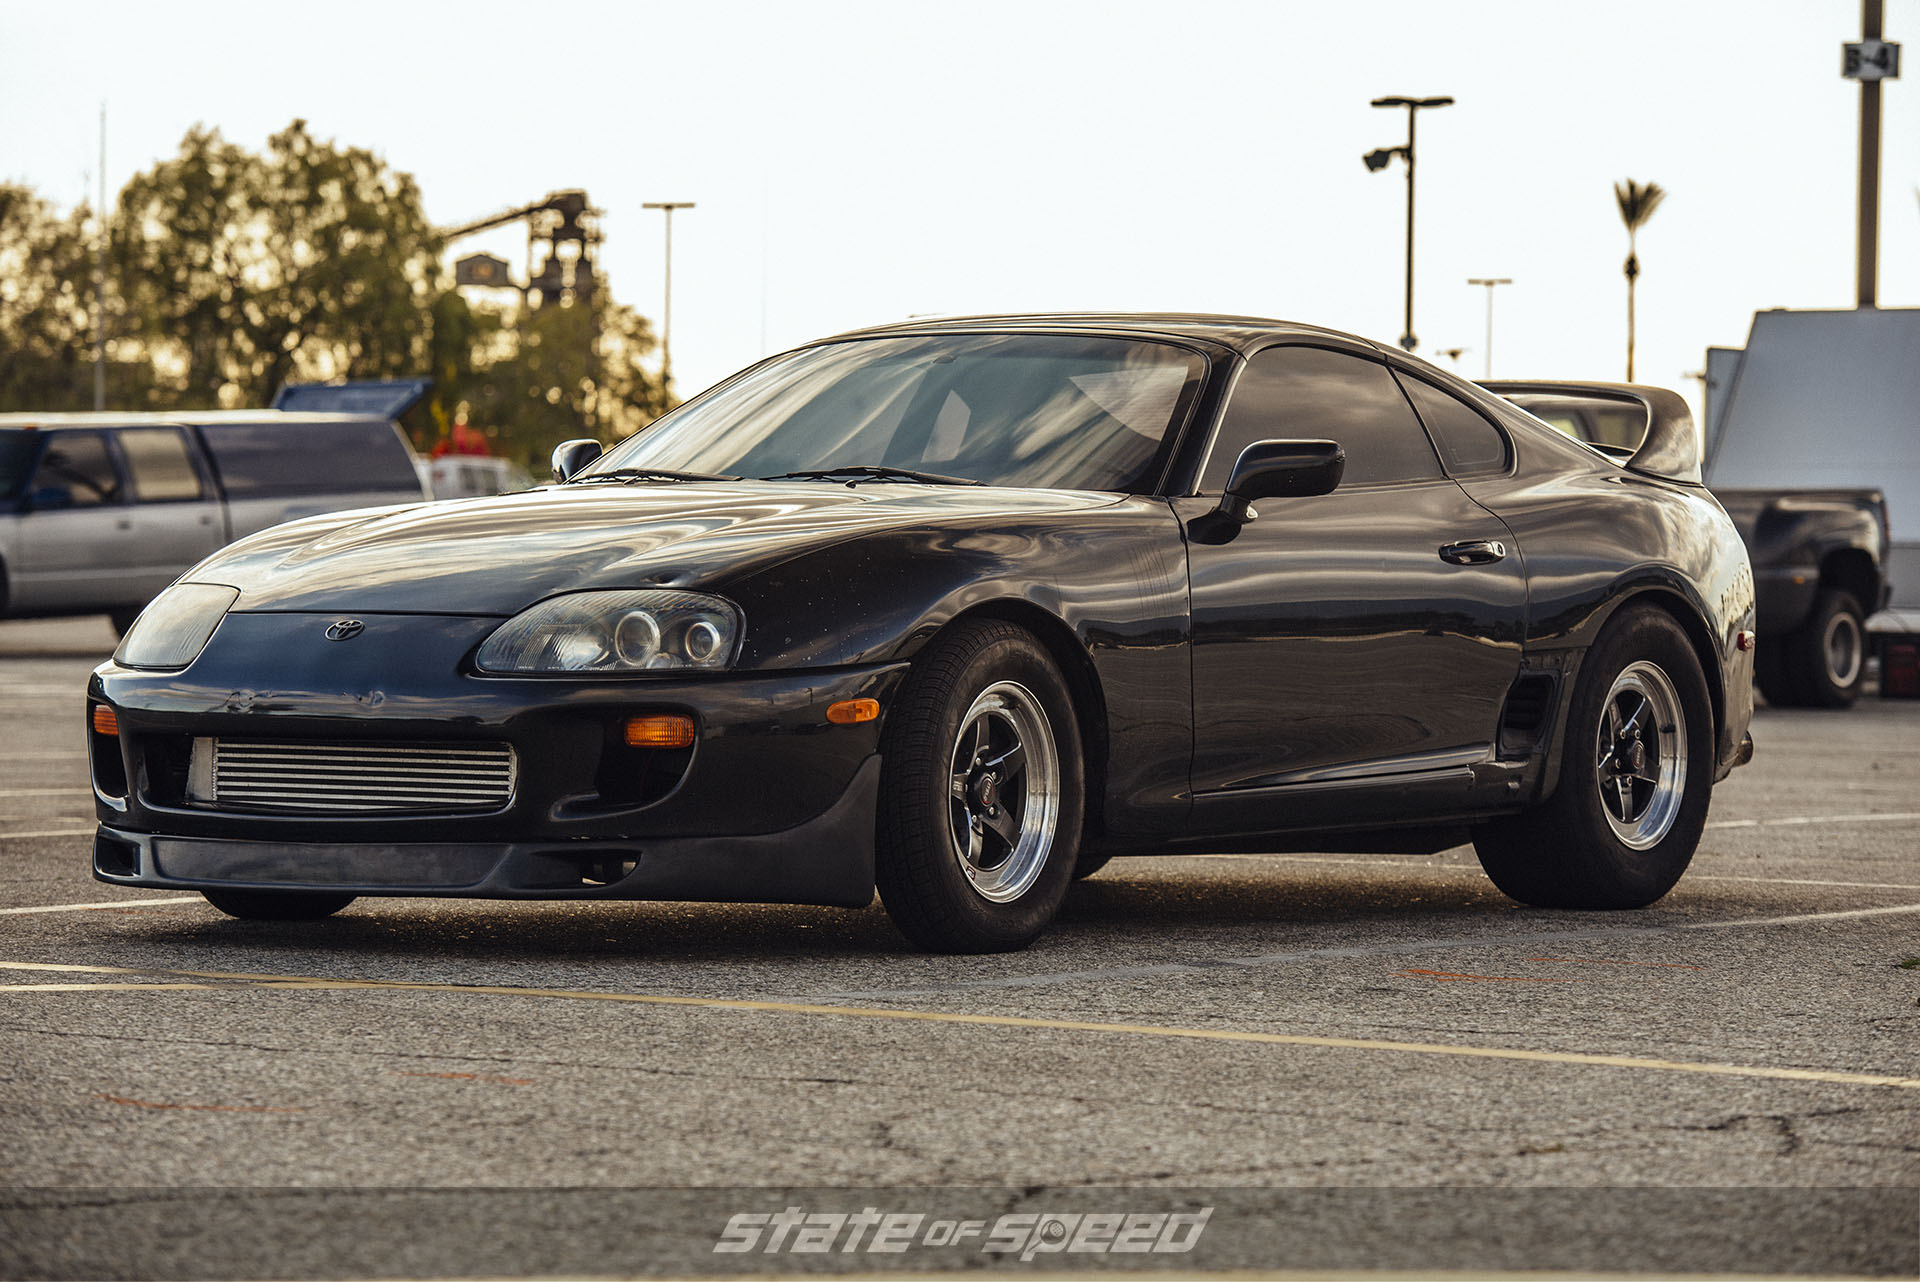 This MkIV Toyota Supra Went From Drag Car to Street Prowler in 12